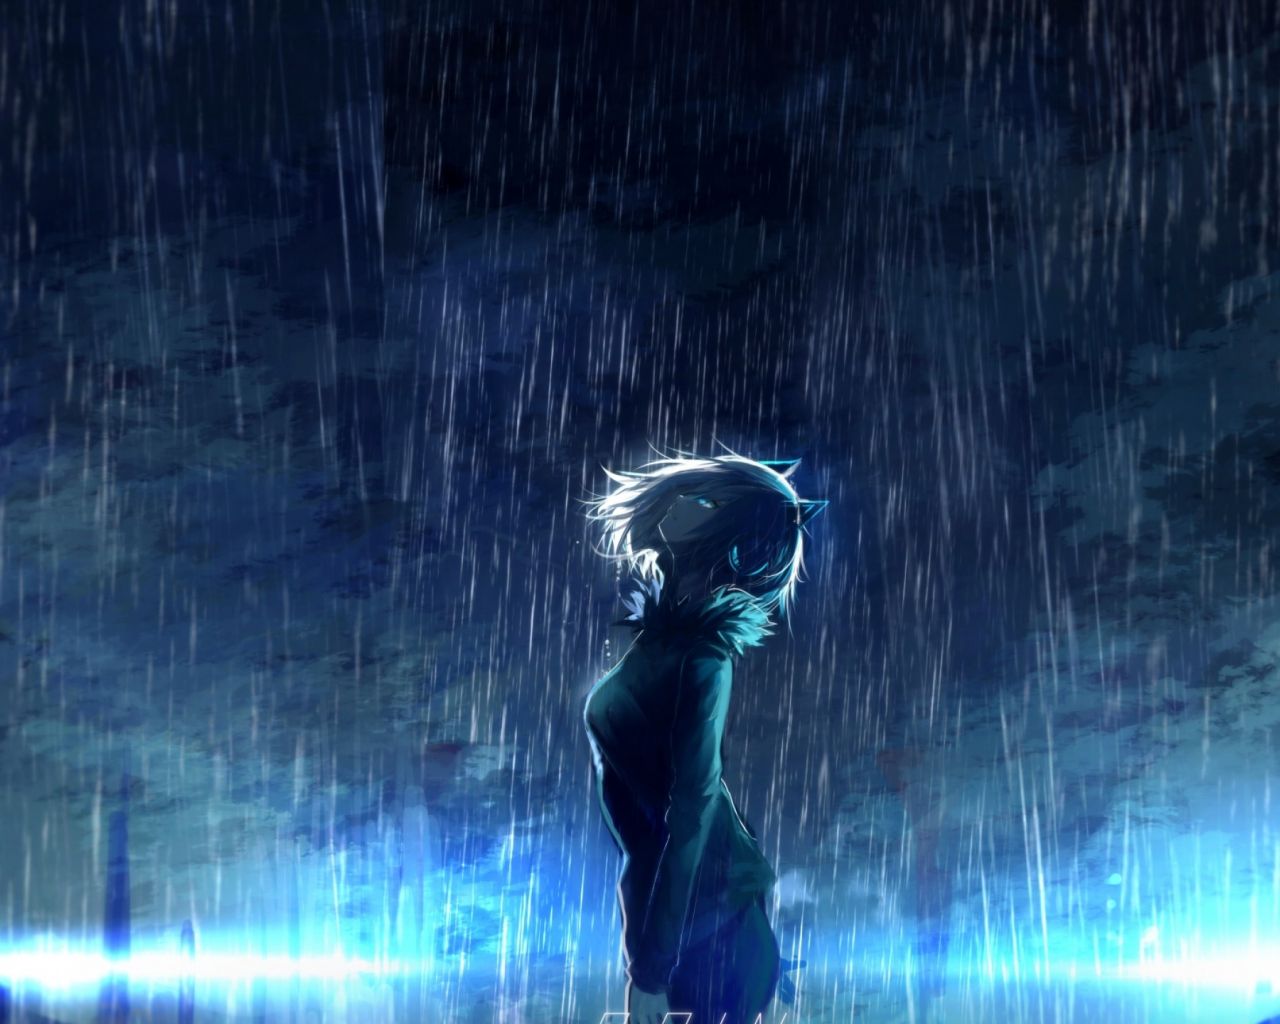 Free download Download 2560x1440 Anime Girl Scenic Raining Animal [2560x1440] for your Desktop, Mobile & Tablet. Explore Anime Rain Wallpaper. Anime Rain Wallpaper, Rain Wallpaper, Rain Wallpaper